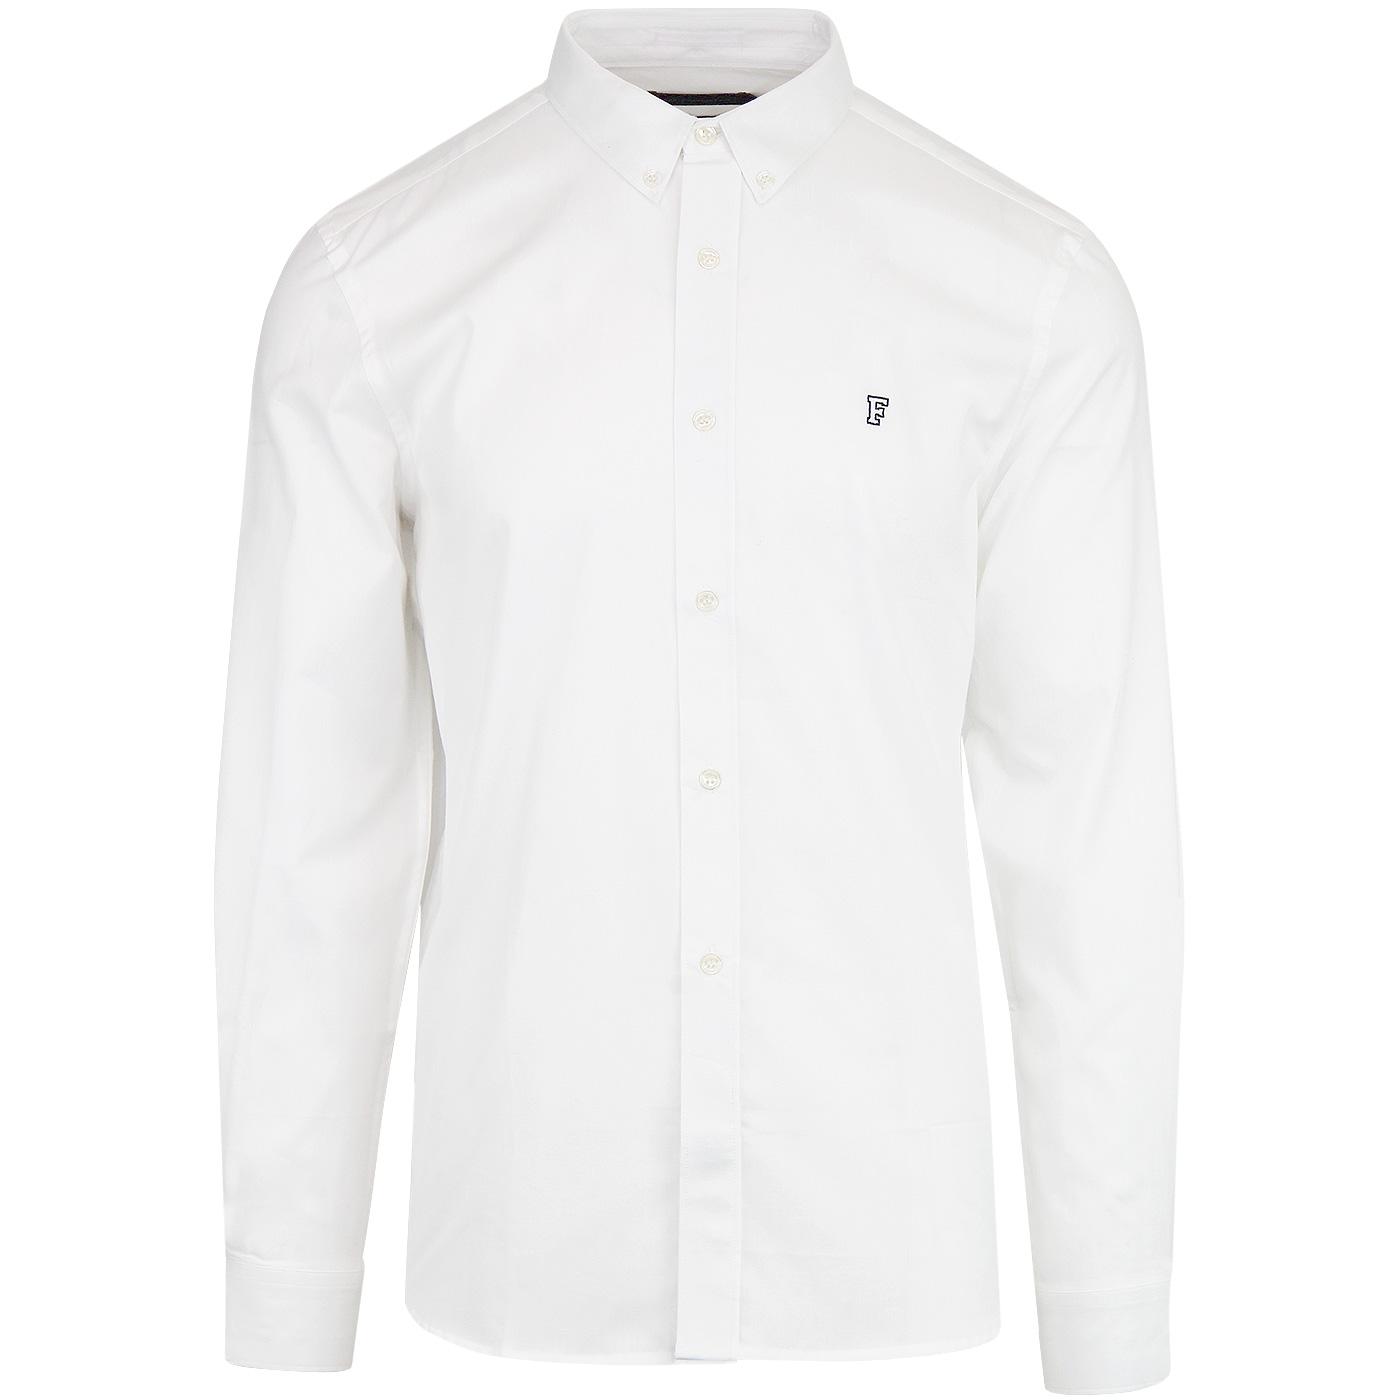 FRENCH CONNECTION Mod Classic Soft Oxford Shirt W